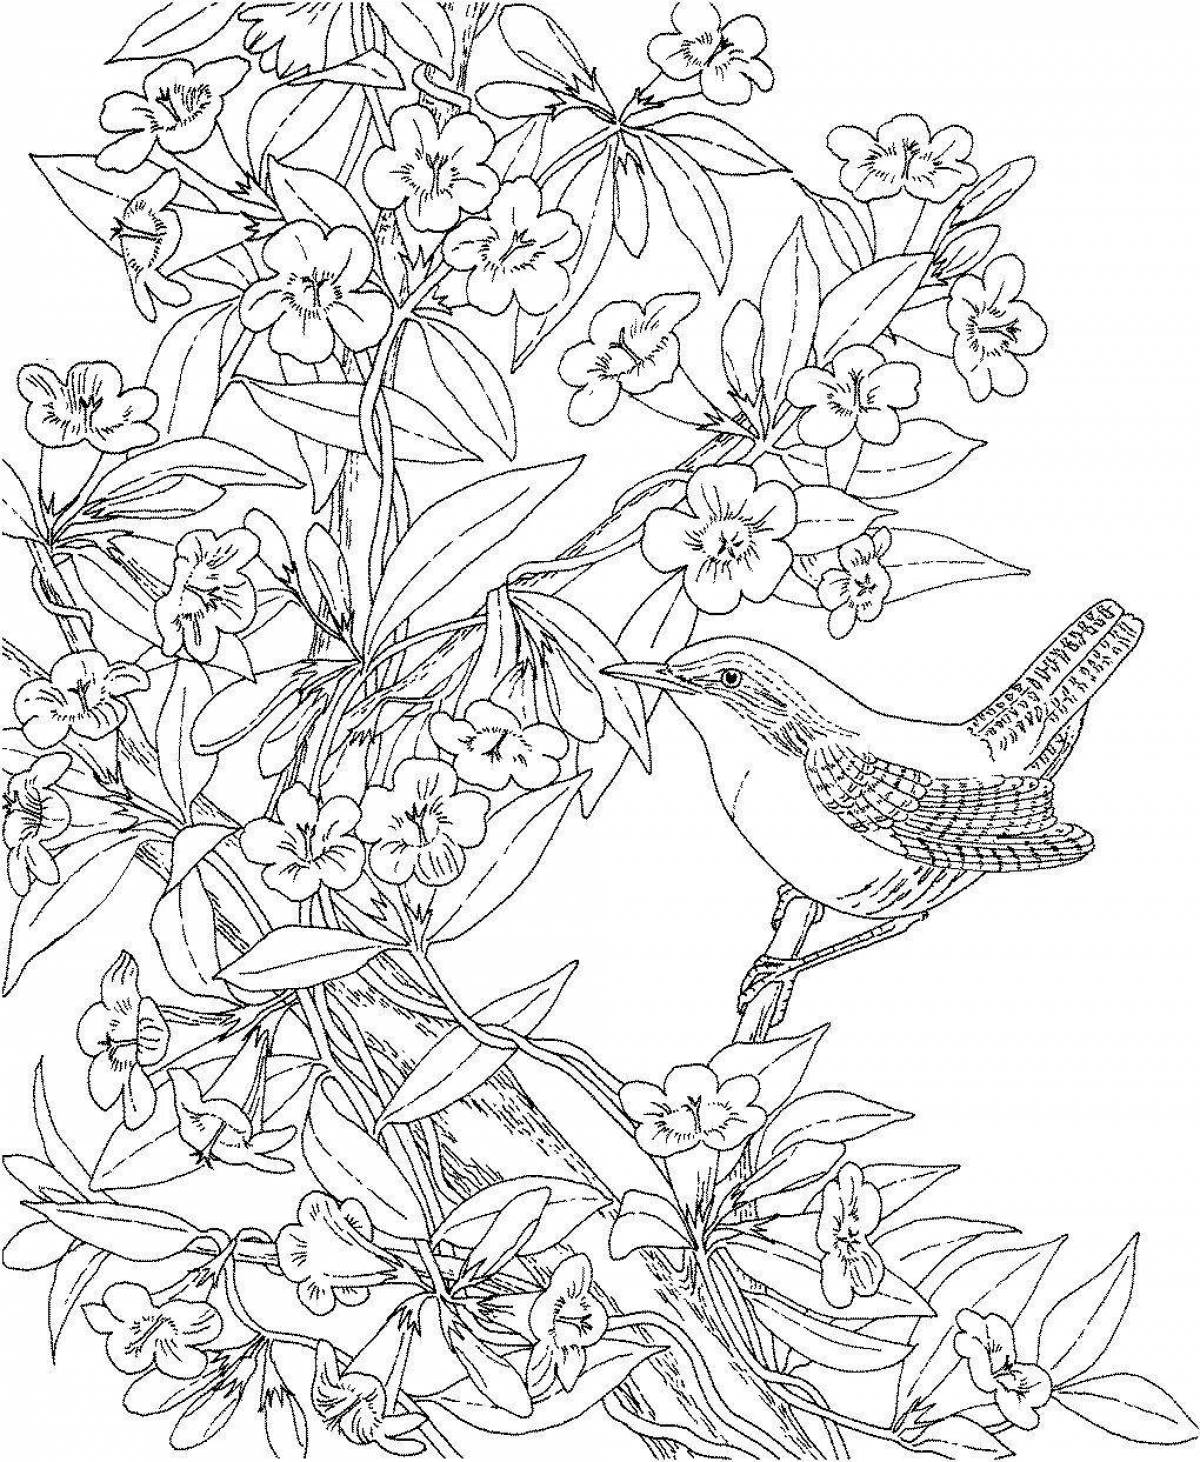 Soothing anti-stress spring coloring book